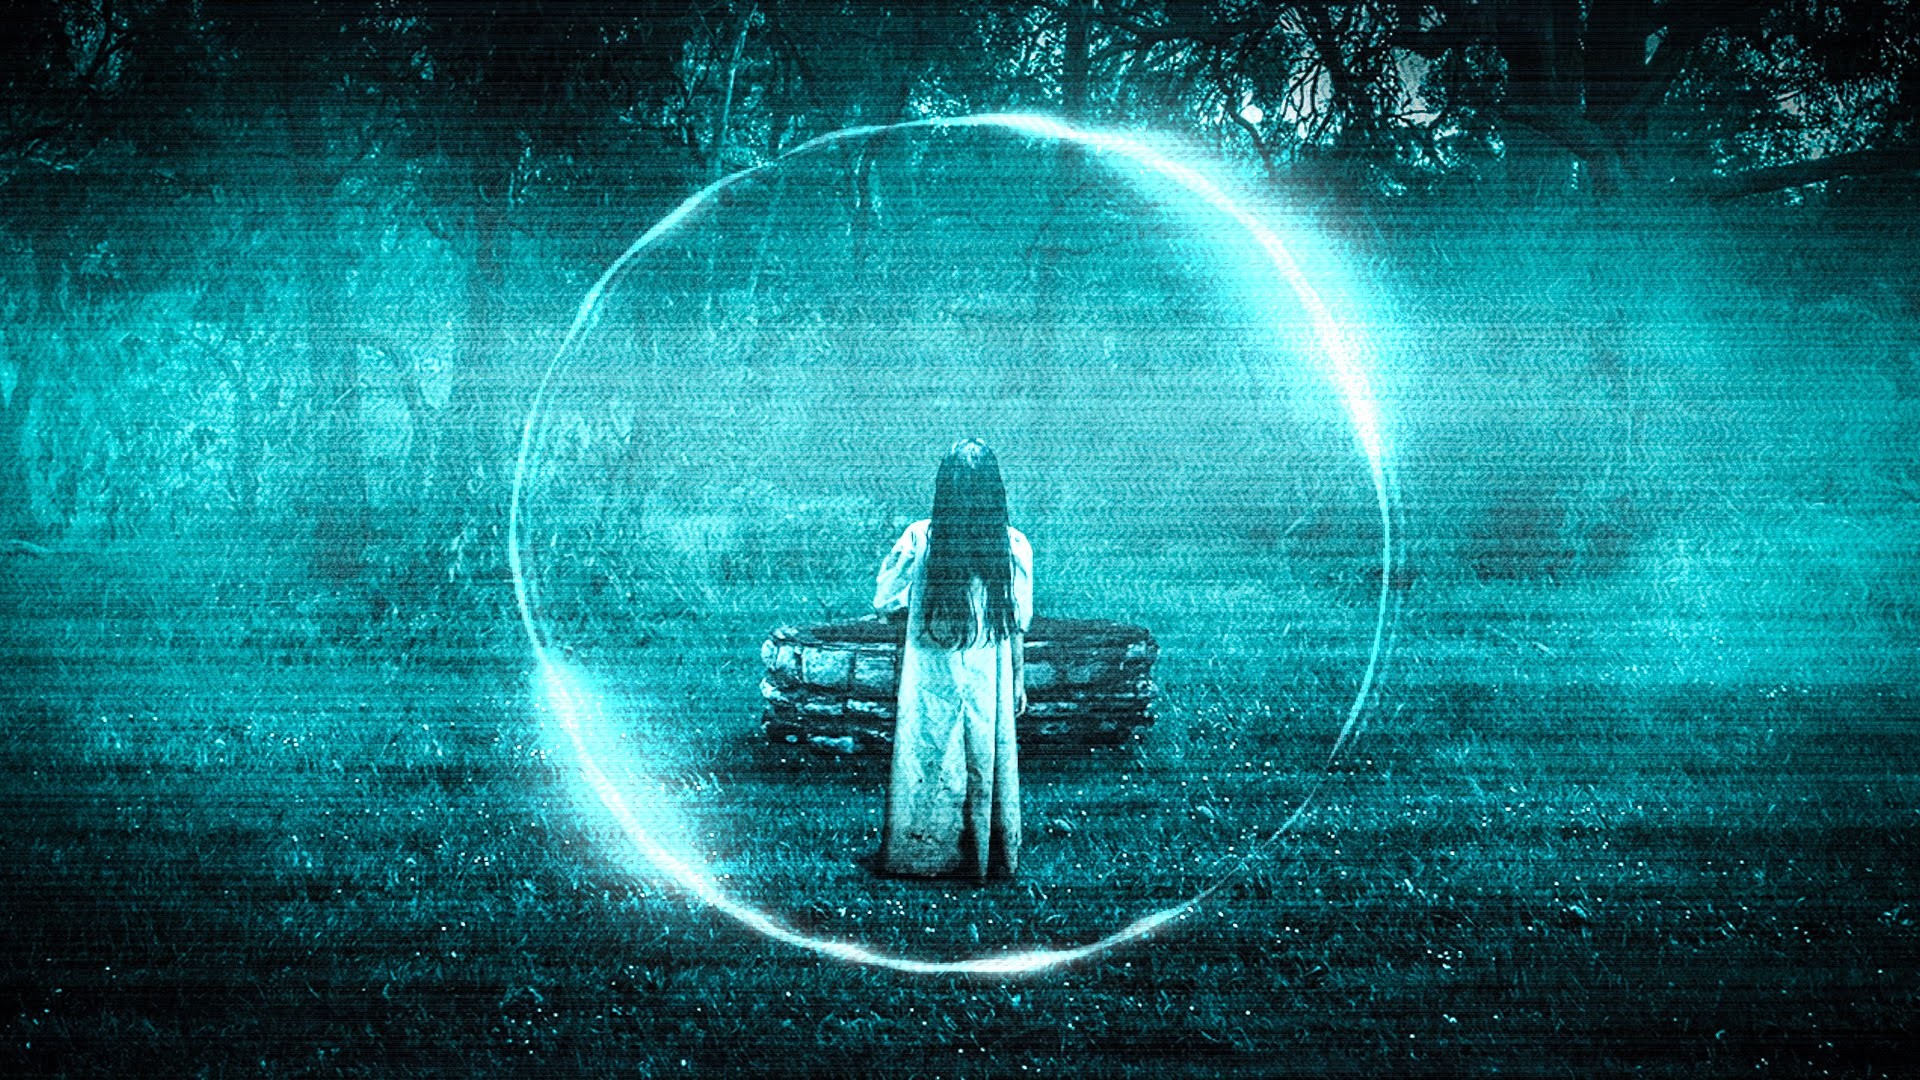 1920x1080 1. 'The Ring' (2002)